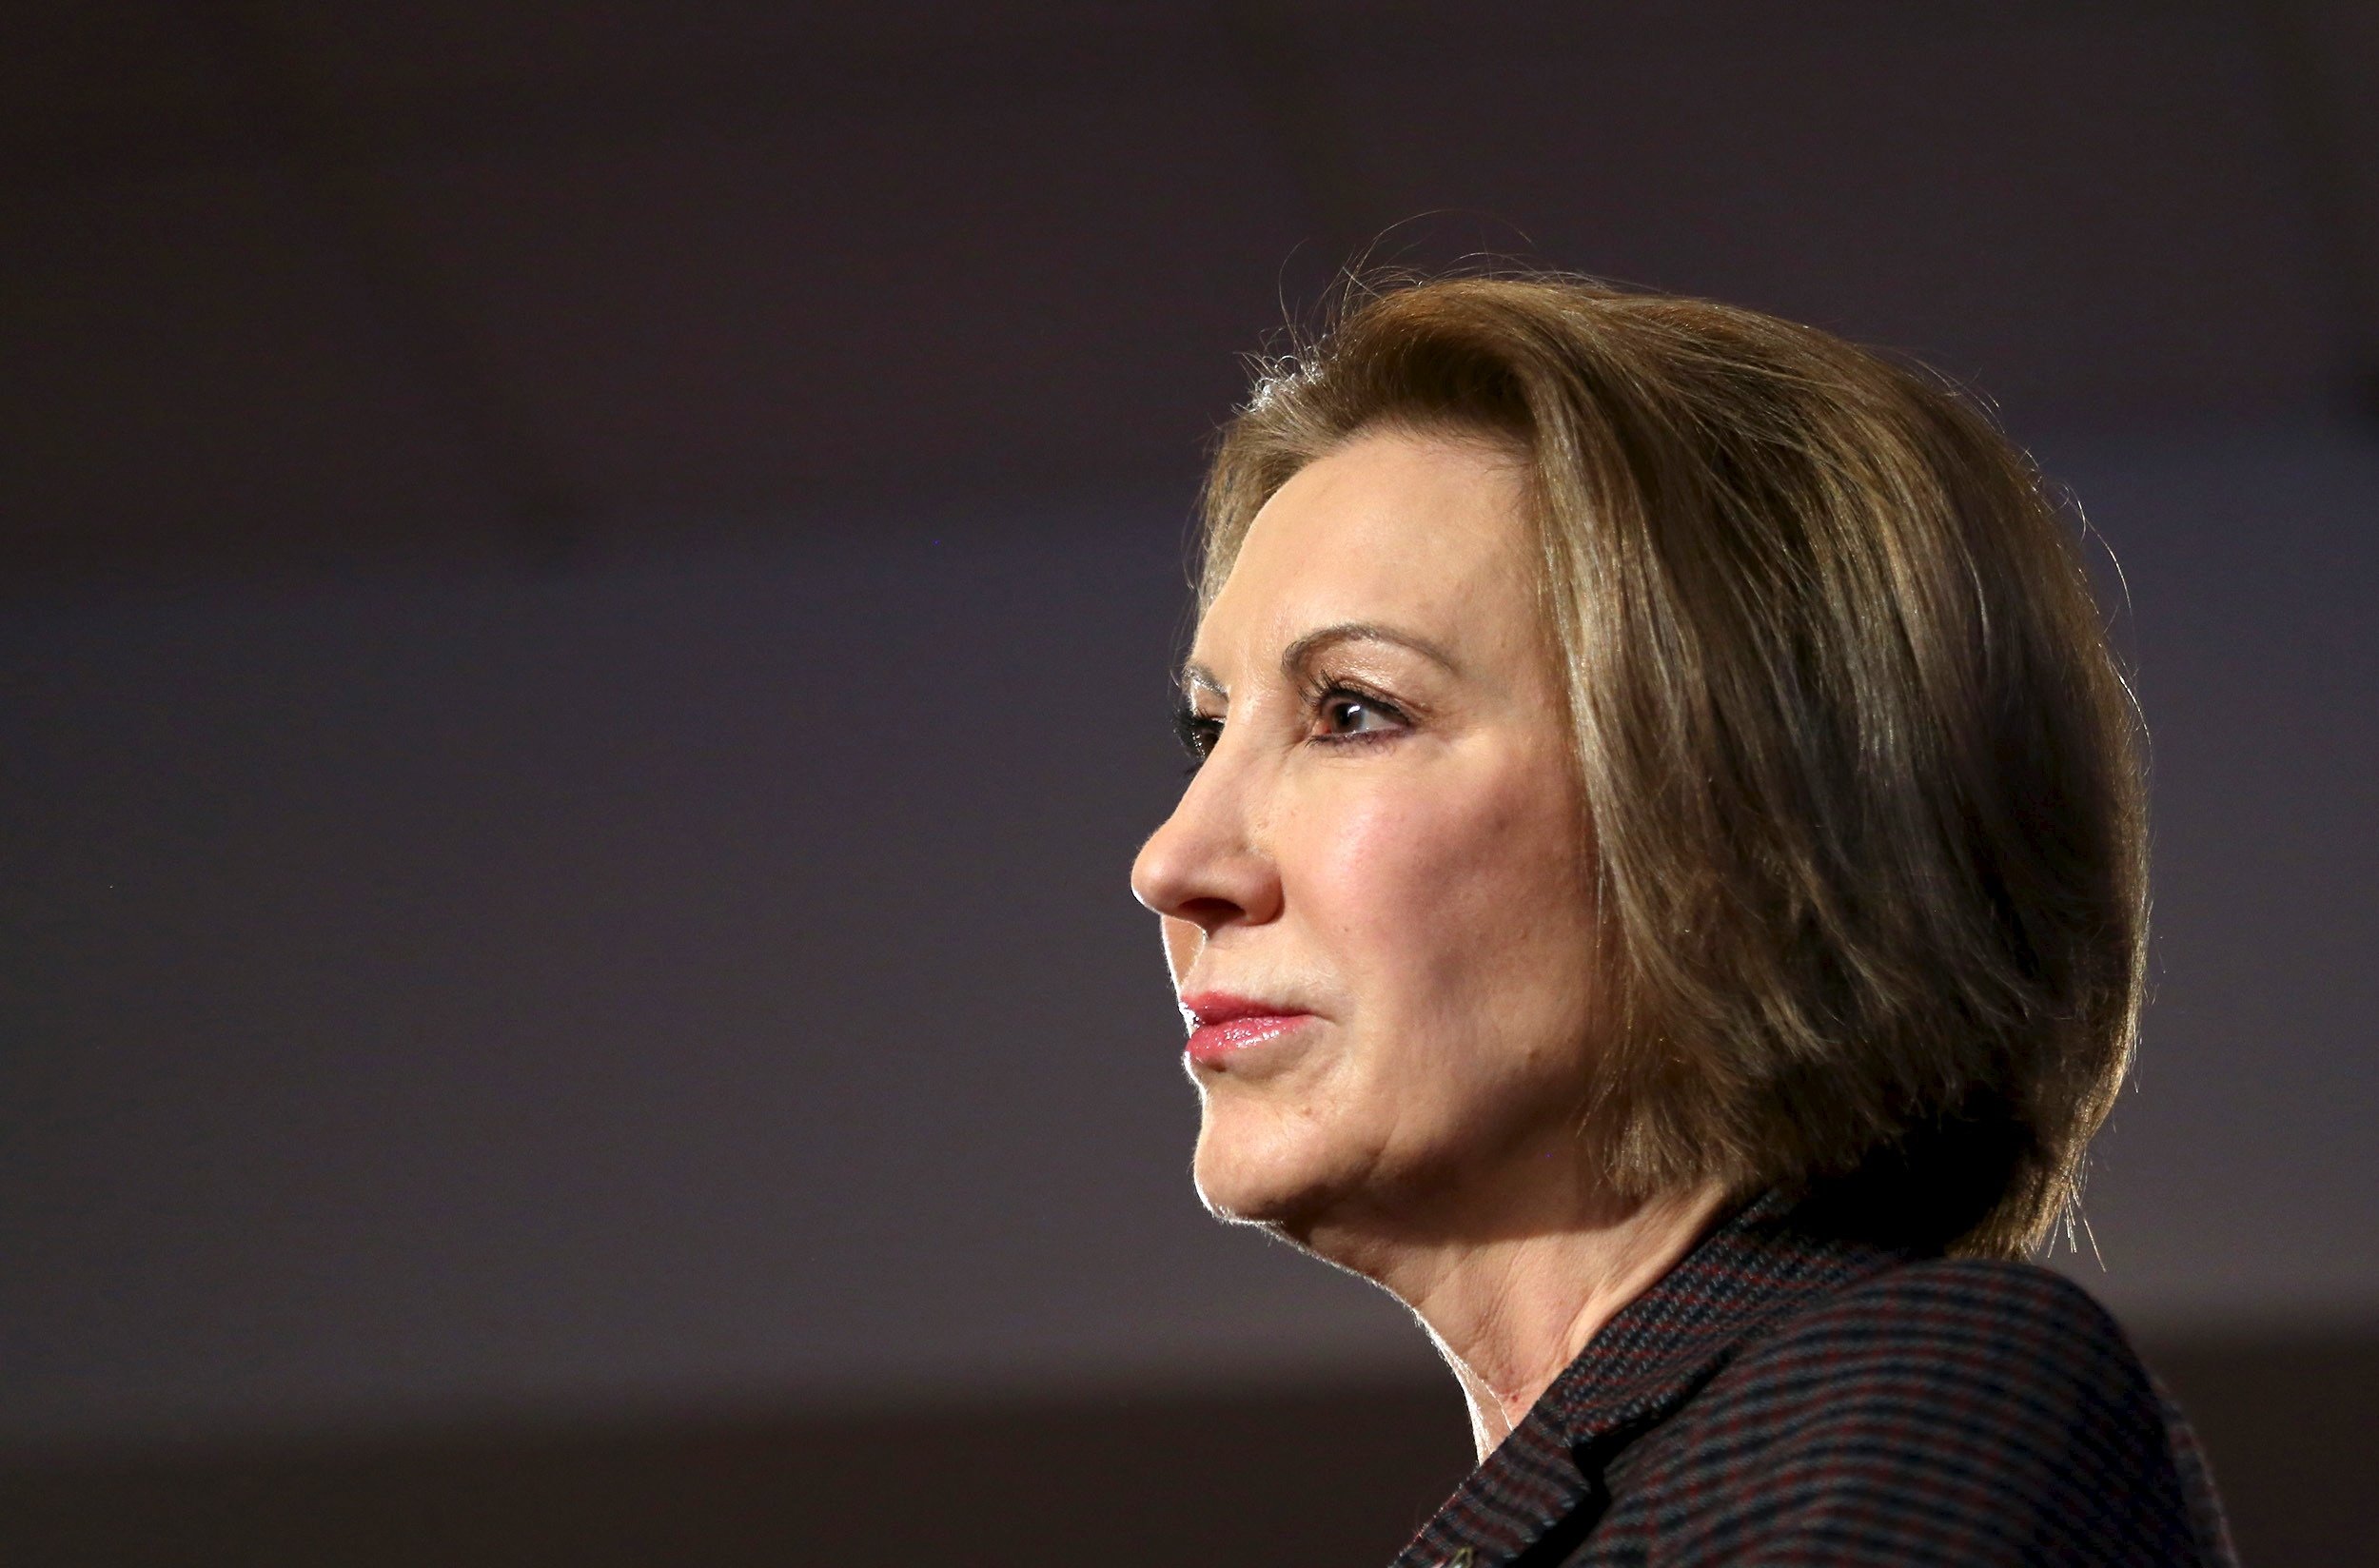 File photo of U.S. Republican presidential candidate Carly Fiorina listening to a question at the New Hampshire GOP's FITN Presidential town hall in Nashua.